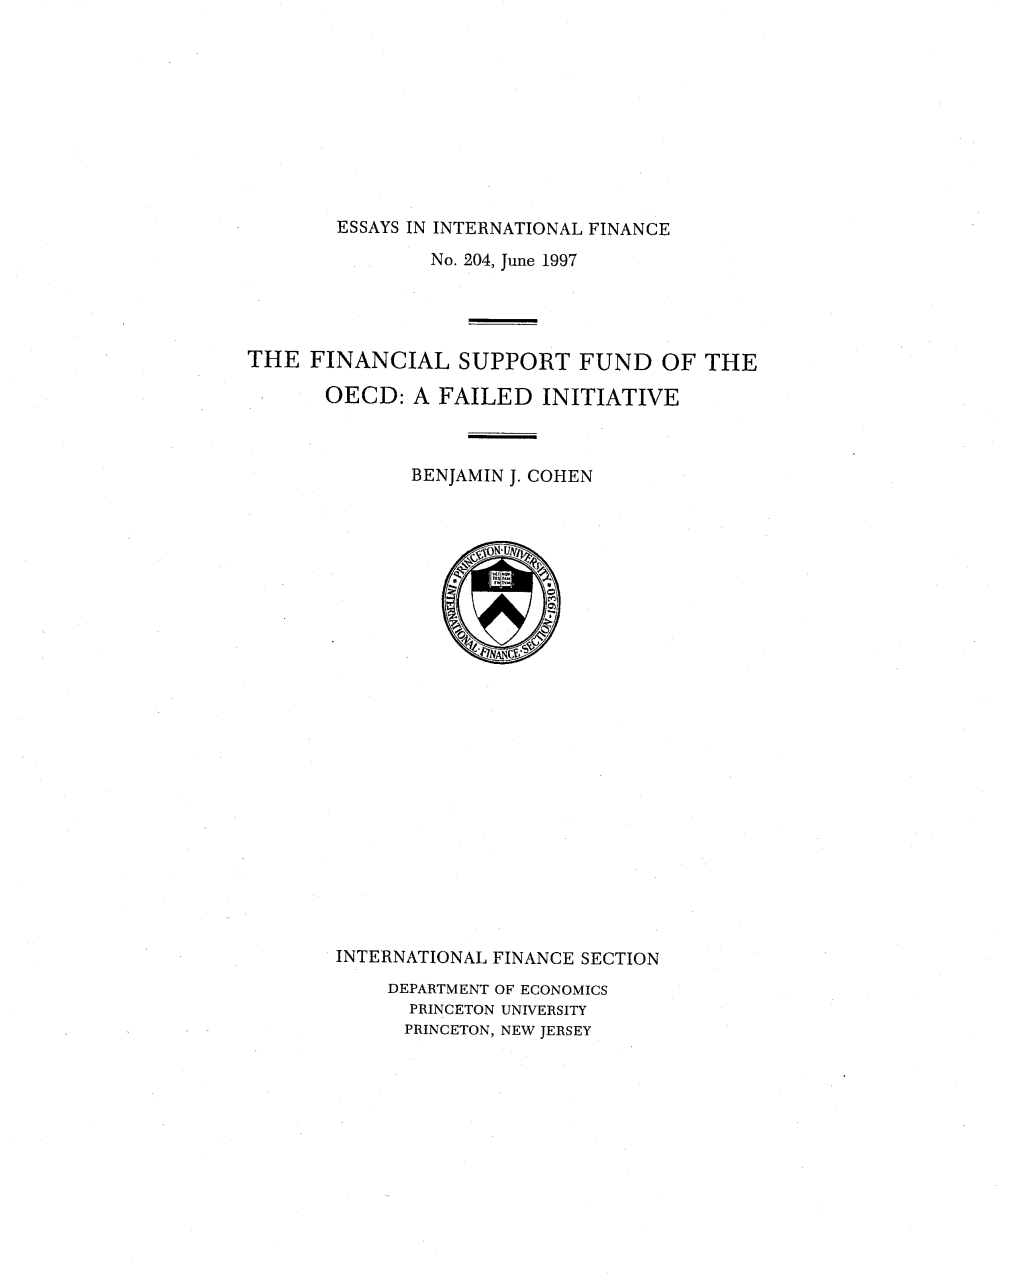 The Financial Support Fund of the OECD: a Failed Initiative / Benjamin J